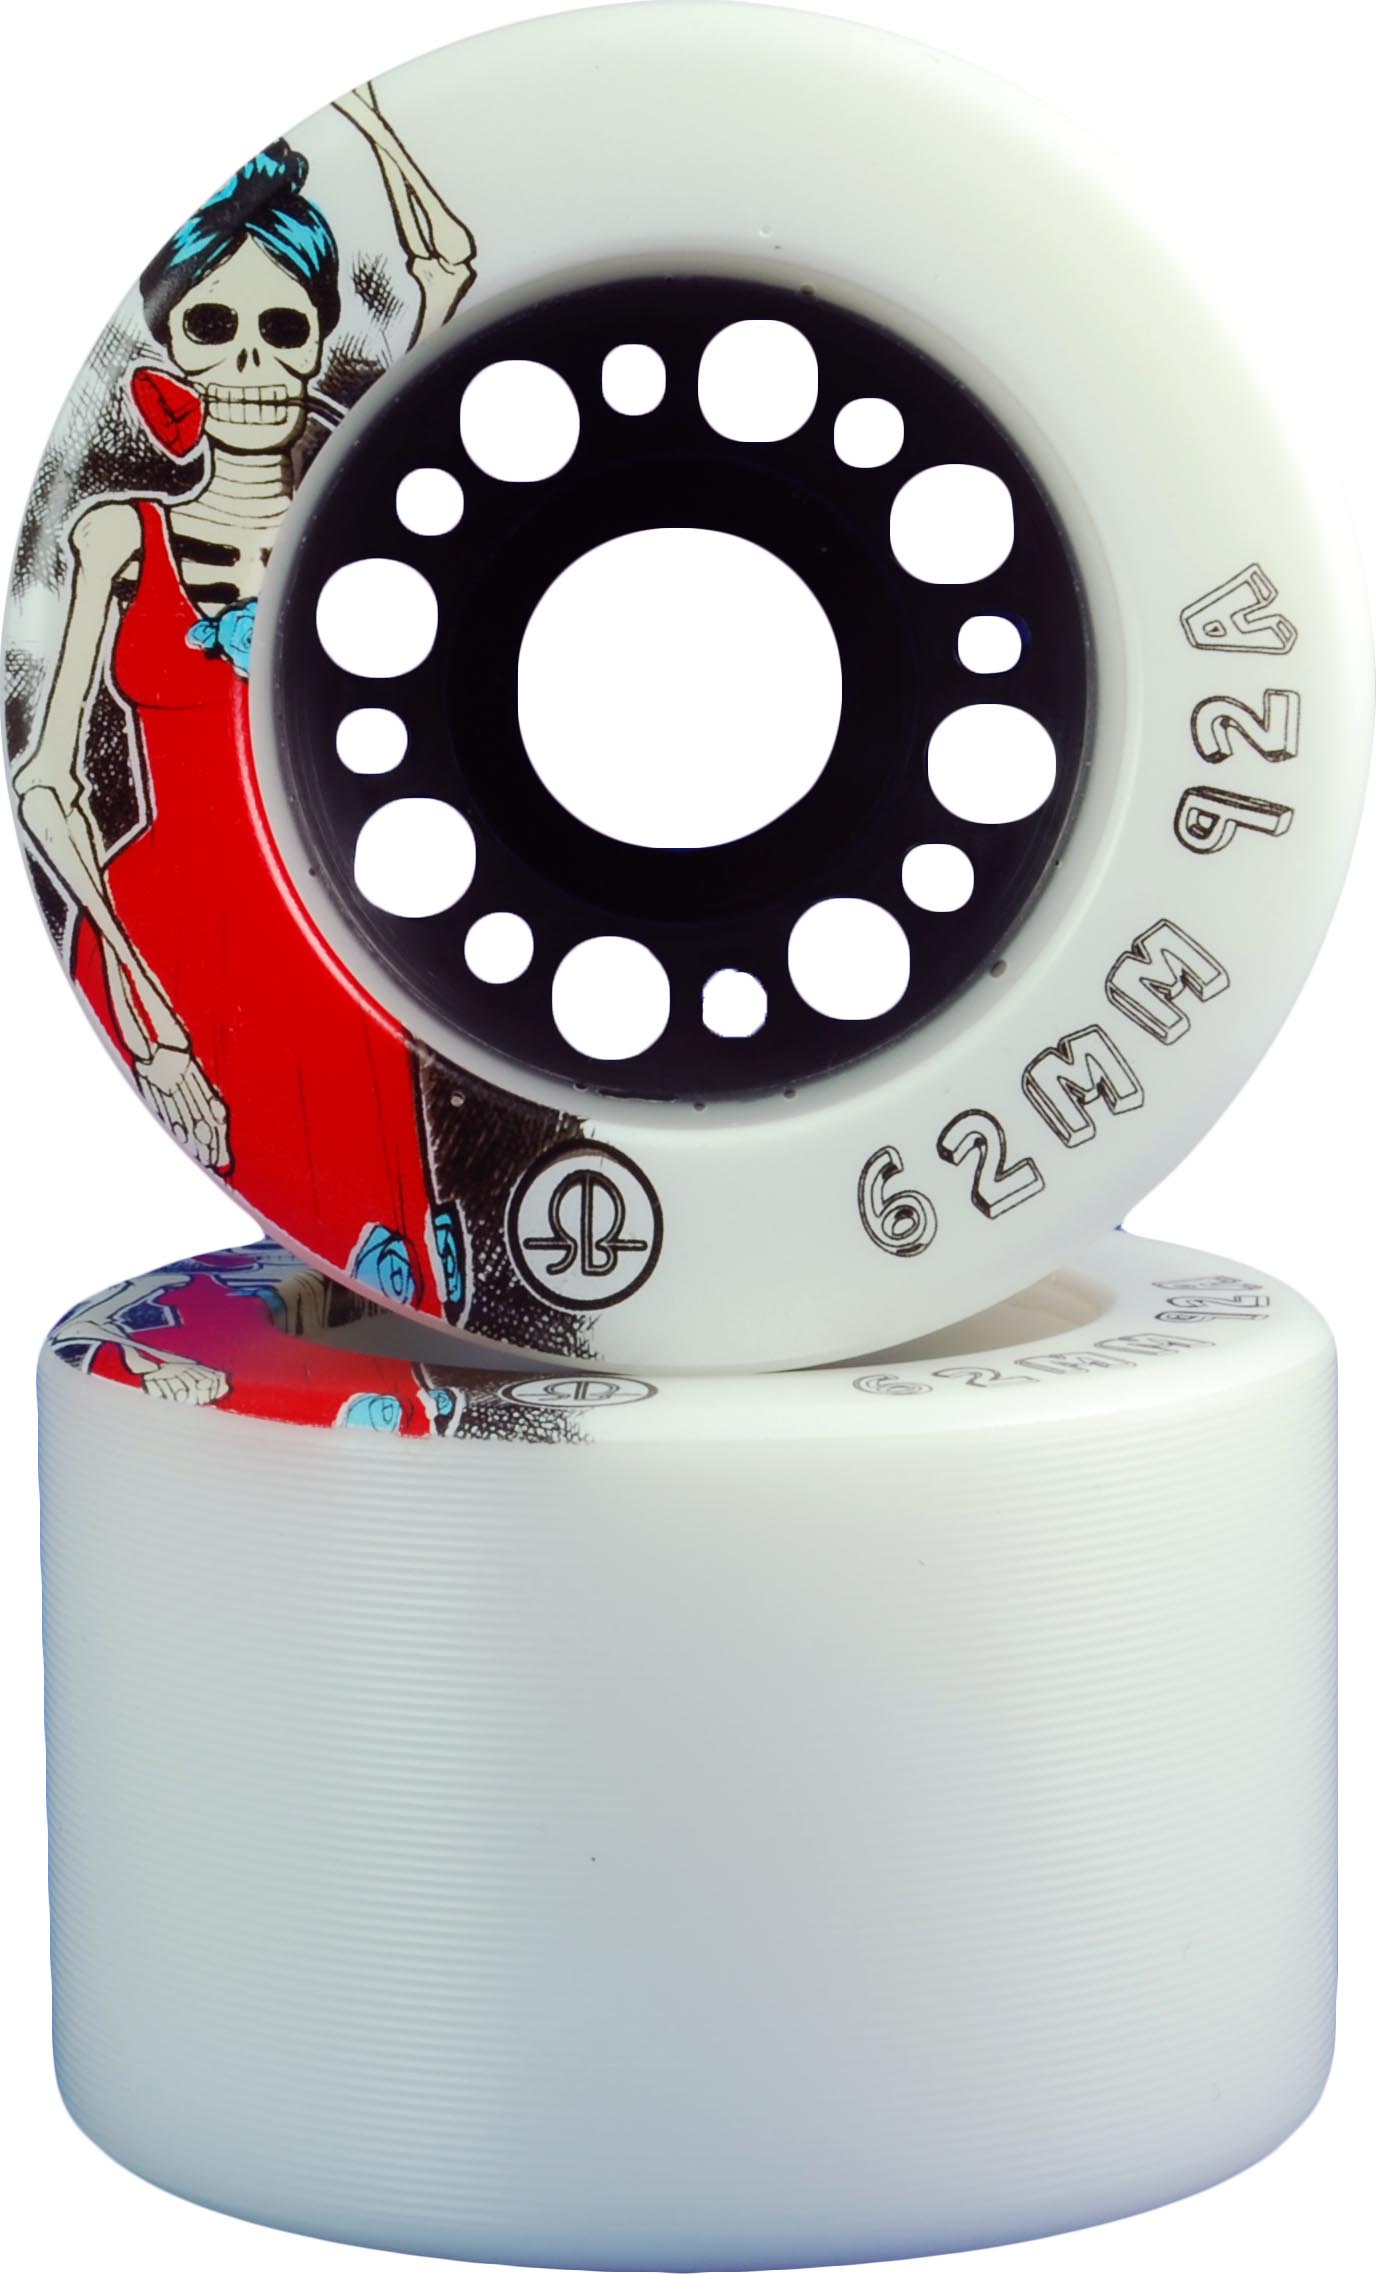 Rollerbones Quad Skate Wheels 62mm x 30mm Day of the Dead 4-Pack 96A White 